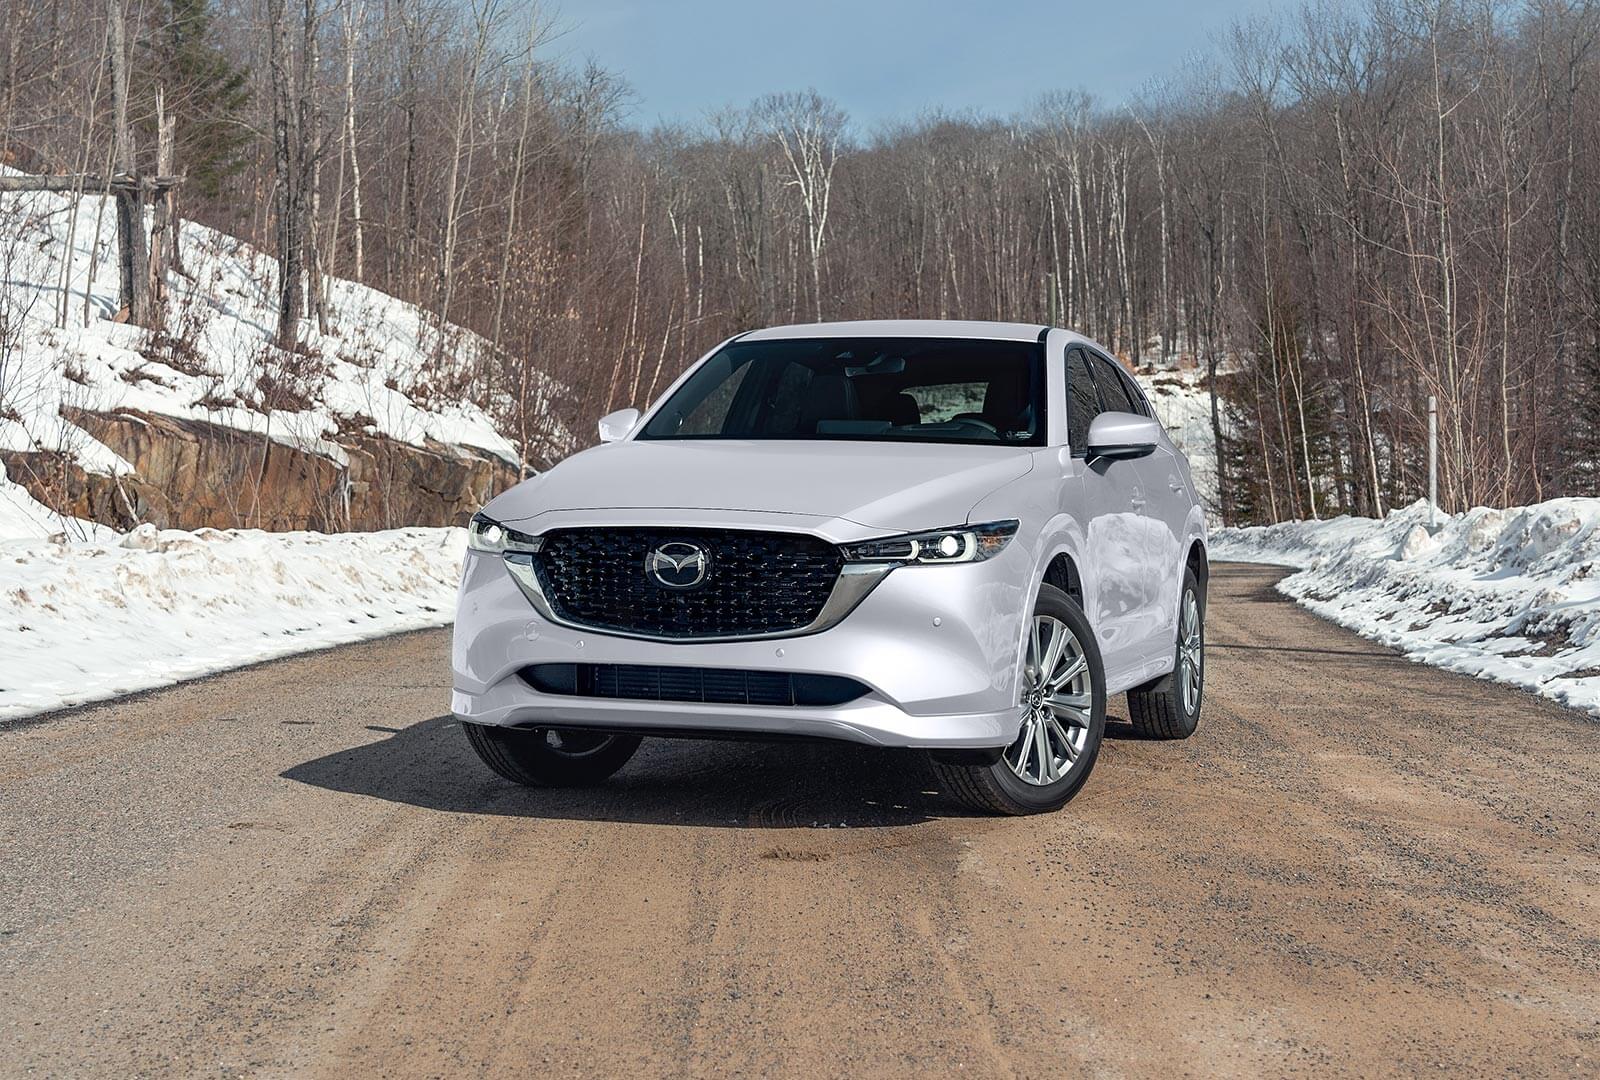 Front view of Rhodium White Metallic CX-5 parked in snowy country road. 